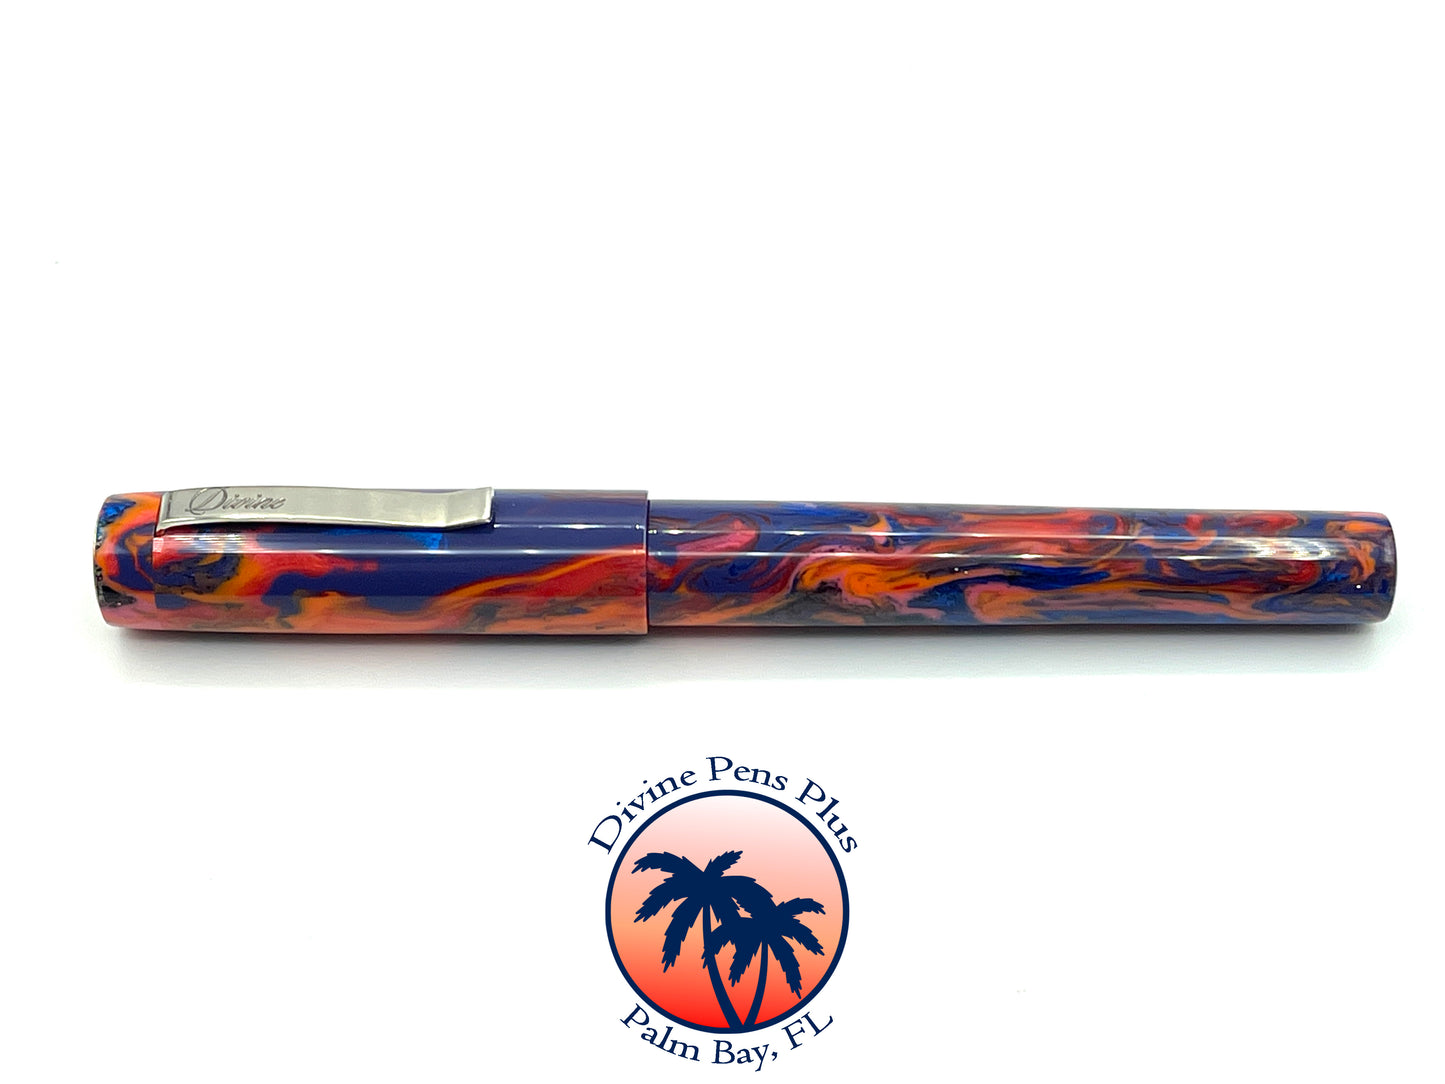 Agape Fountain Pen - "Pursuit of Happiness"